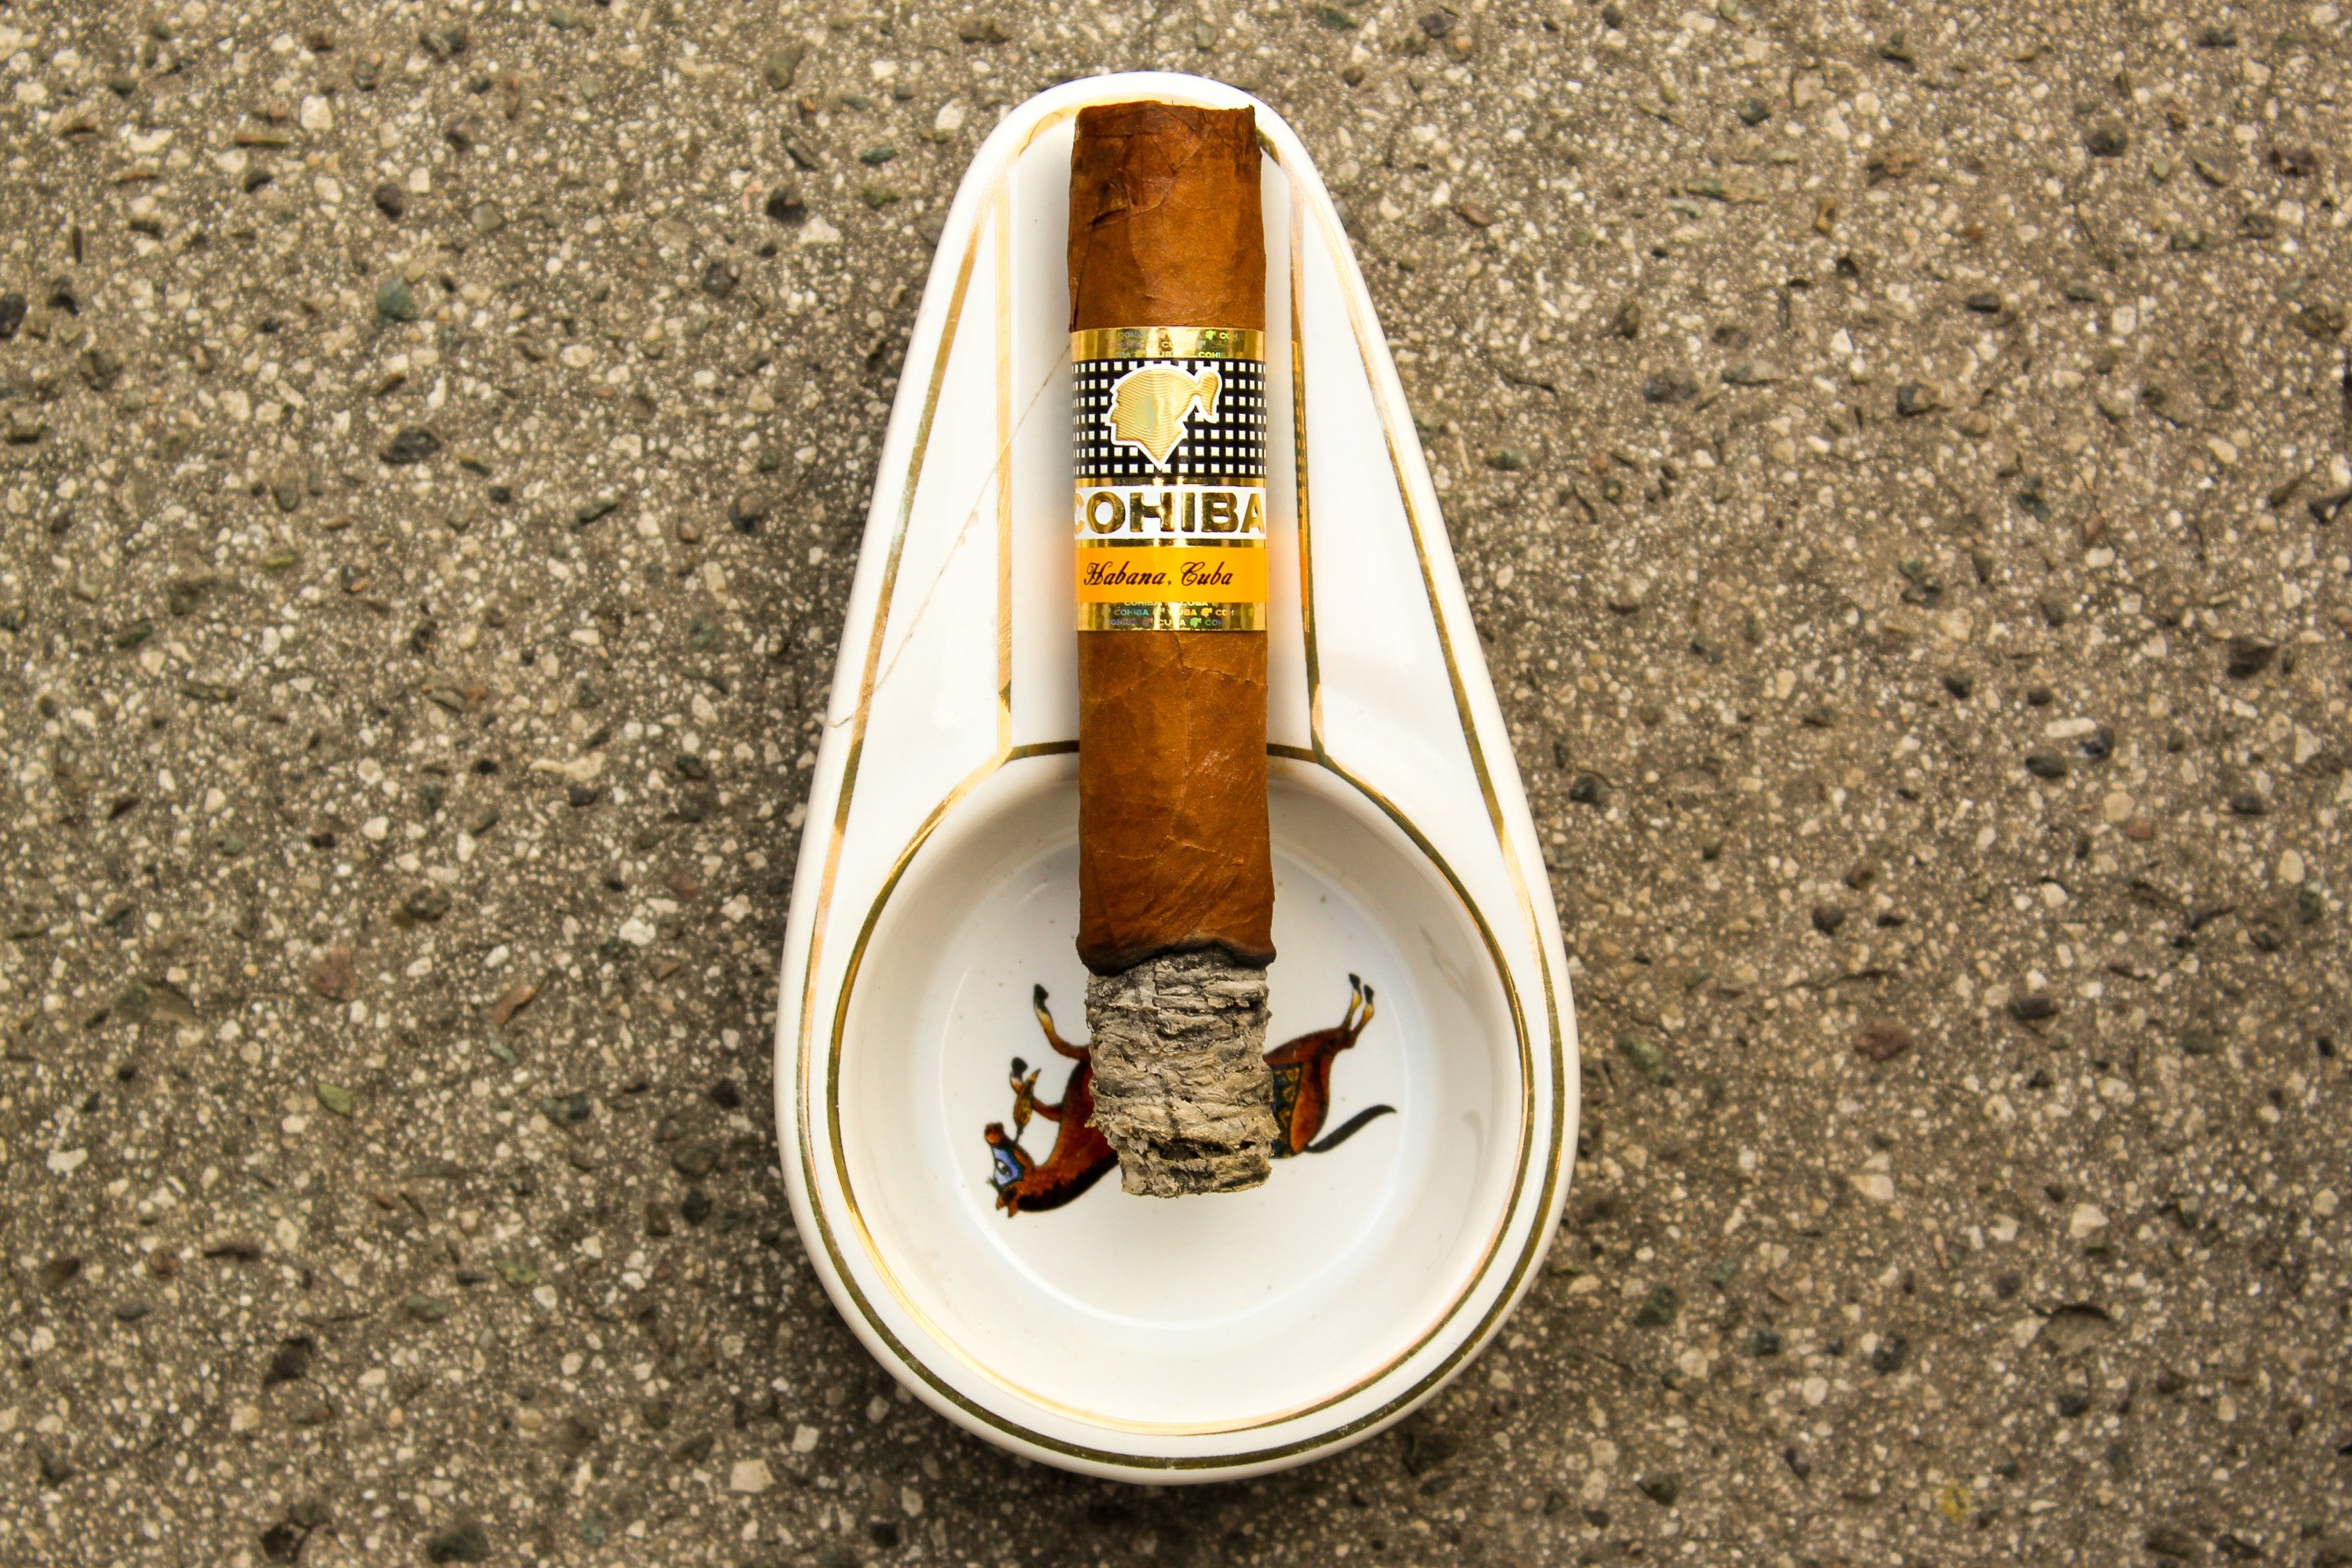 Cohiba Siglo I after being lit